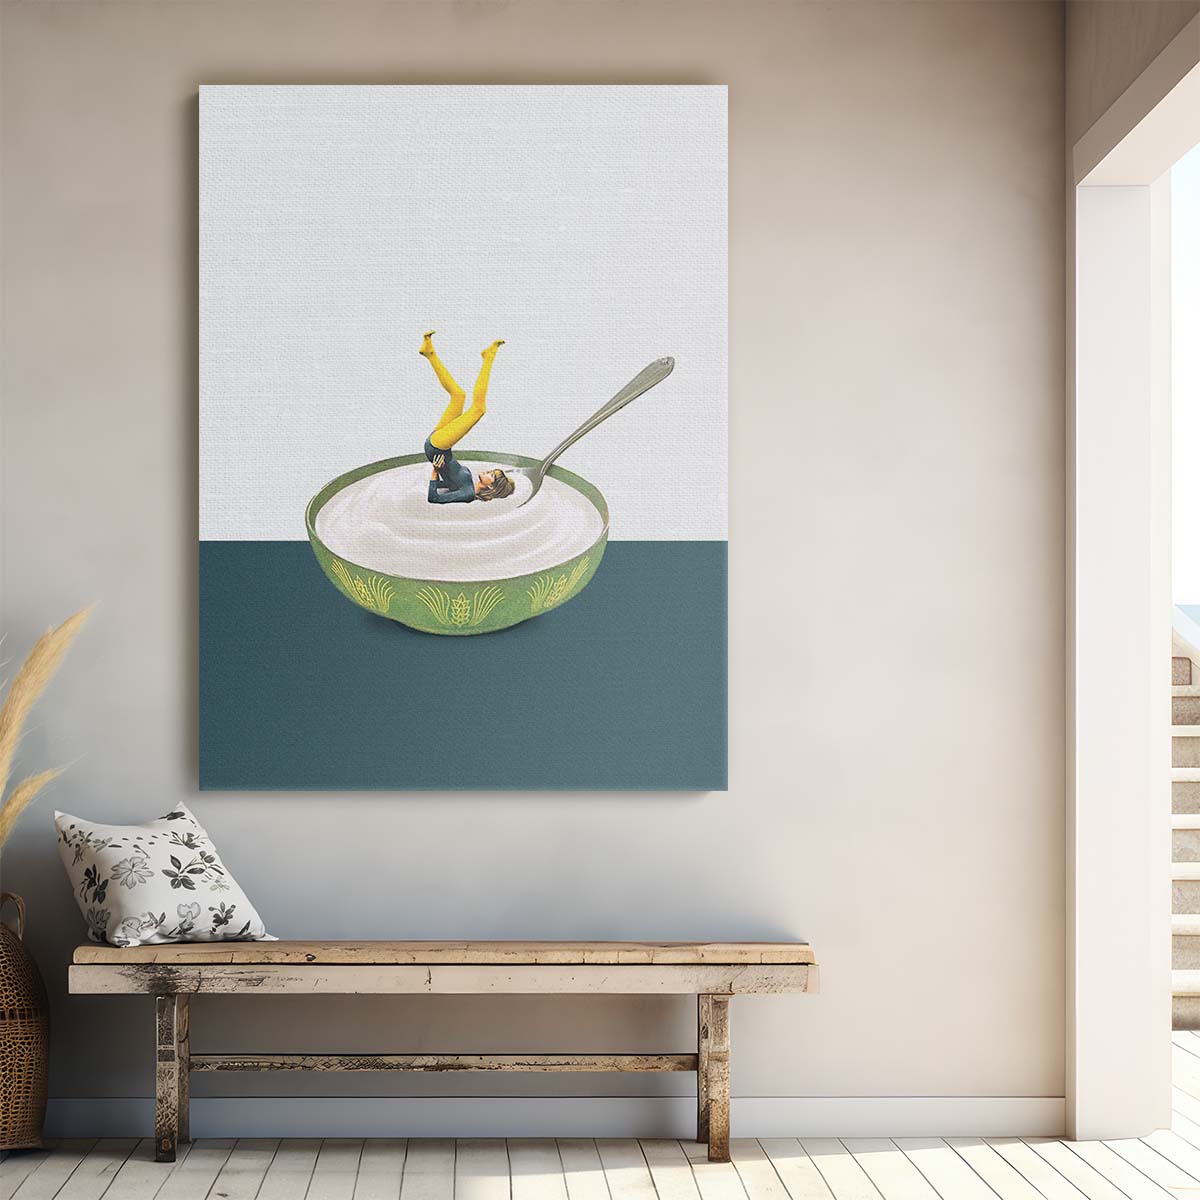 Surreal Yoga Woman Breakfast Illustration by Maarten Leon by Luxuriance Designs, made in USA